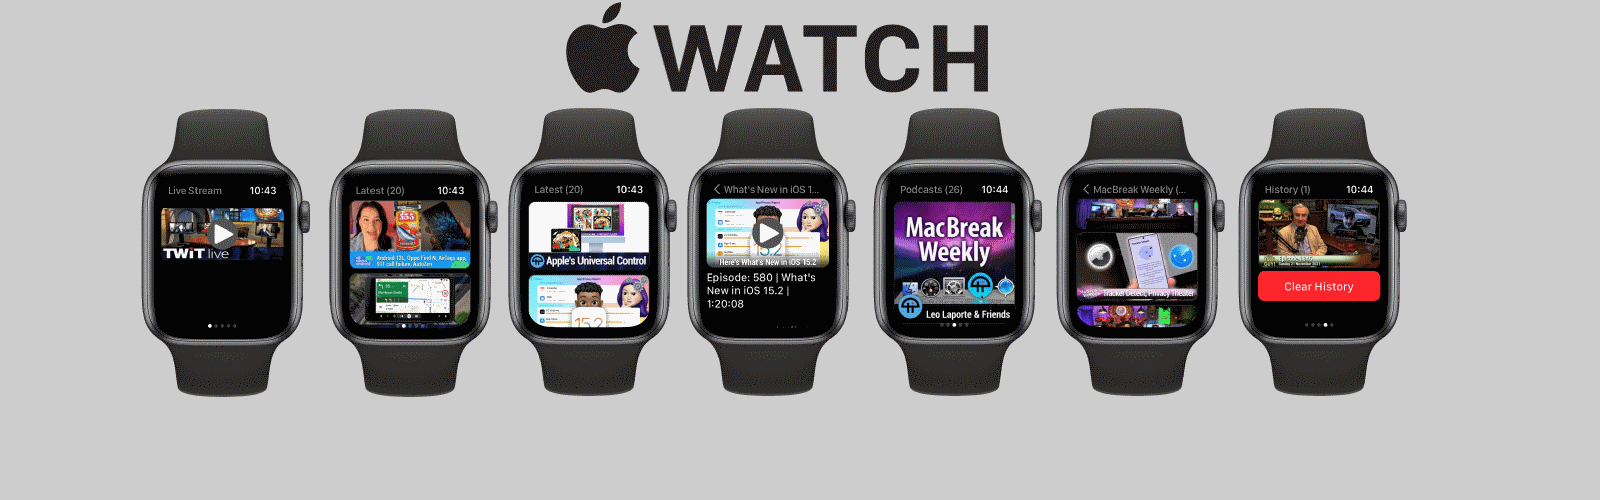 TWiT.tv Player for Apple Watch